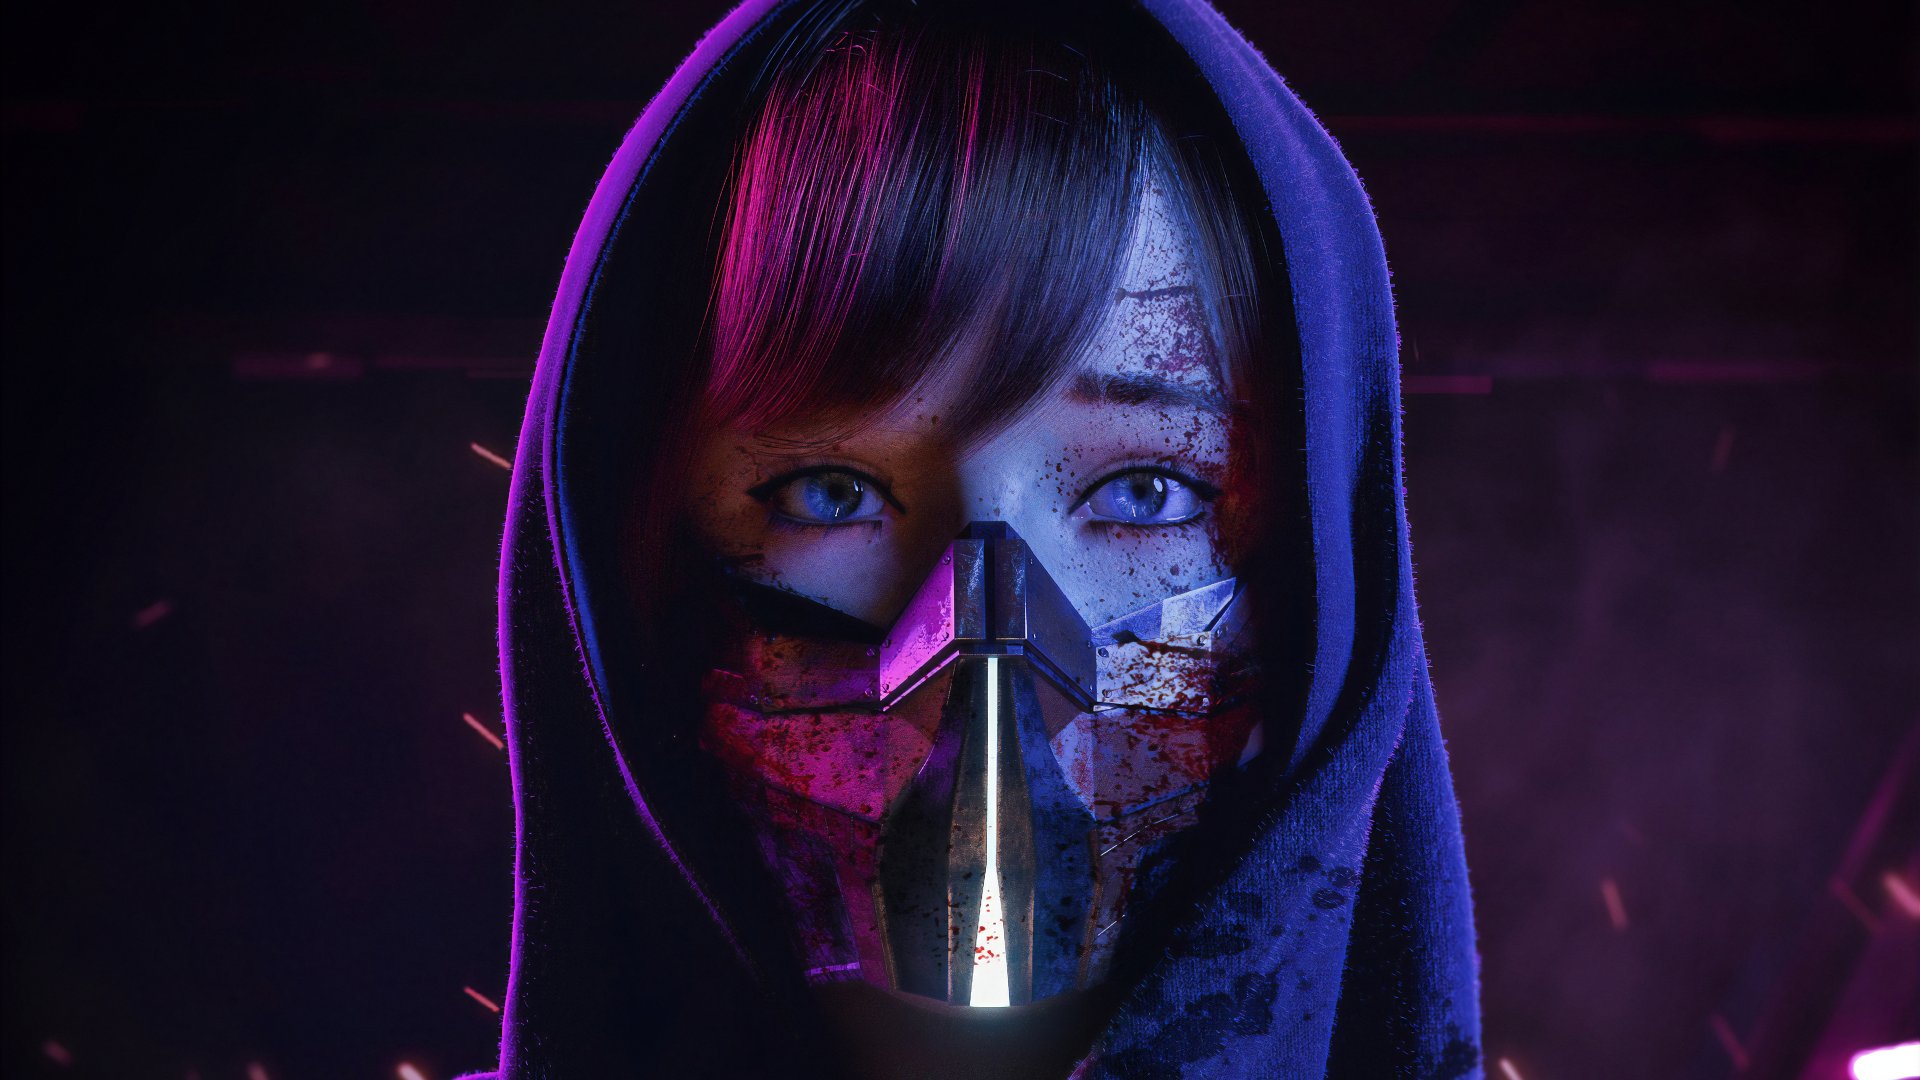 HD wallpaper anonymus mask computer disguise mask  disguise human  representation  Wallpaper Flare